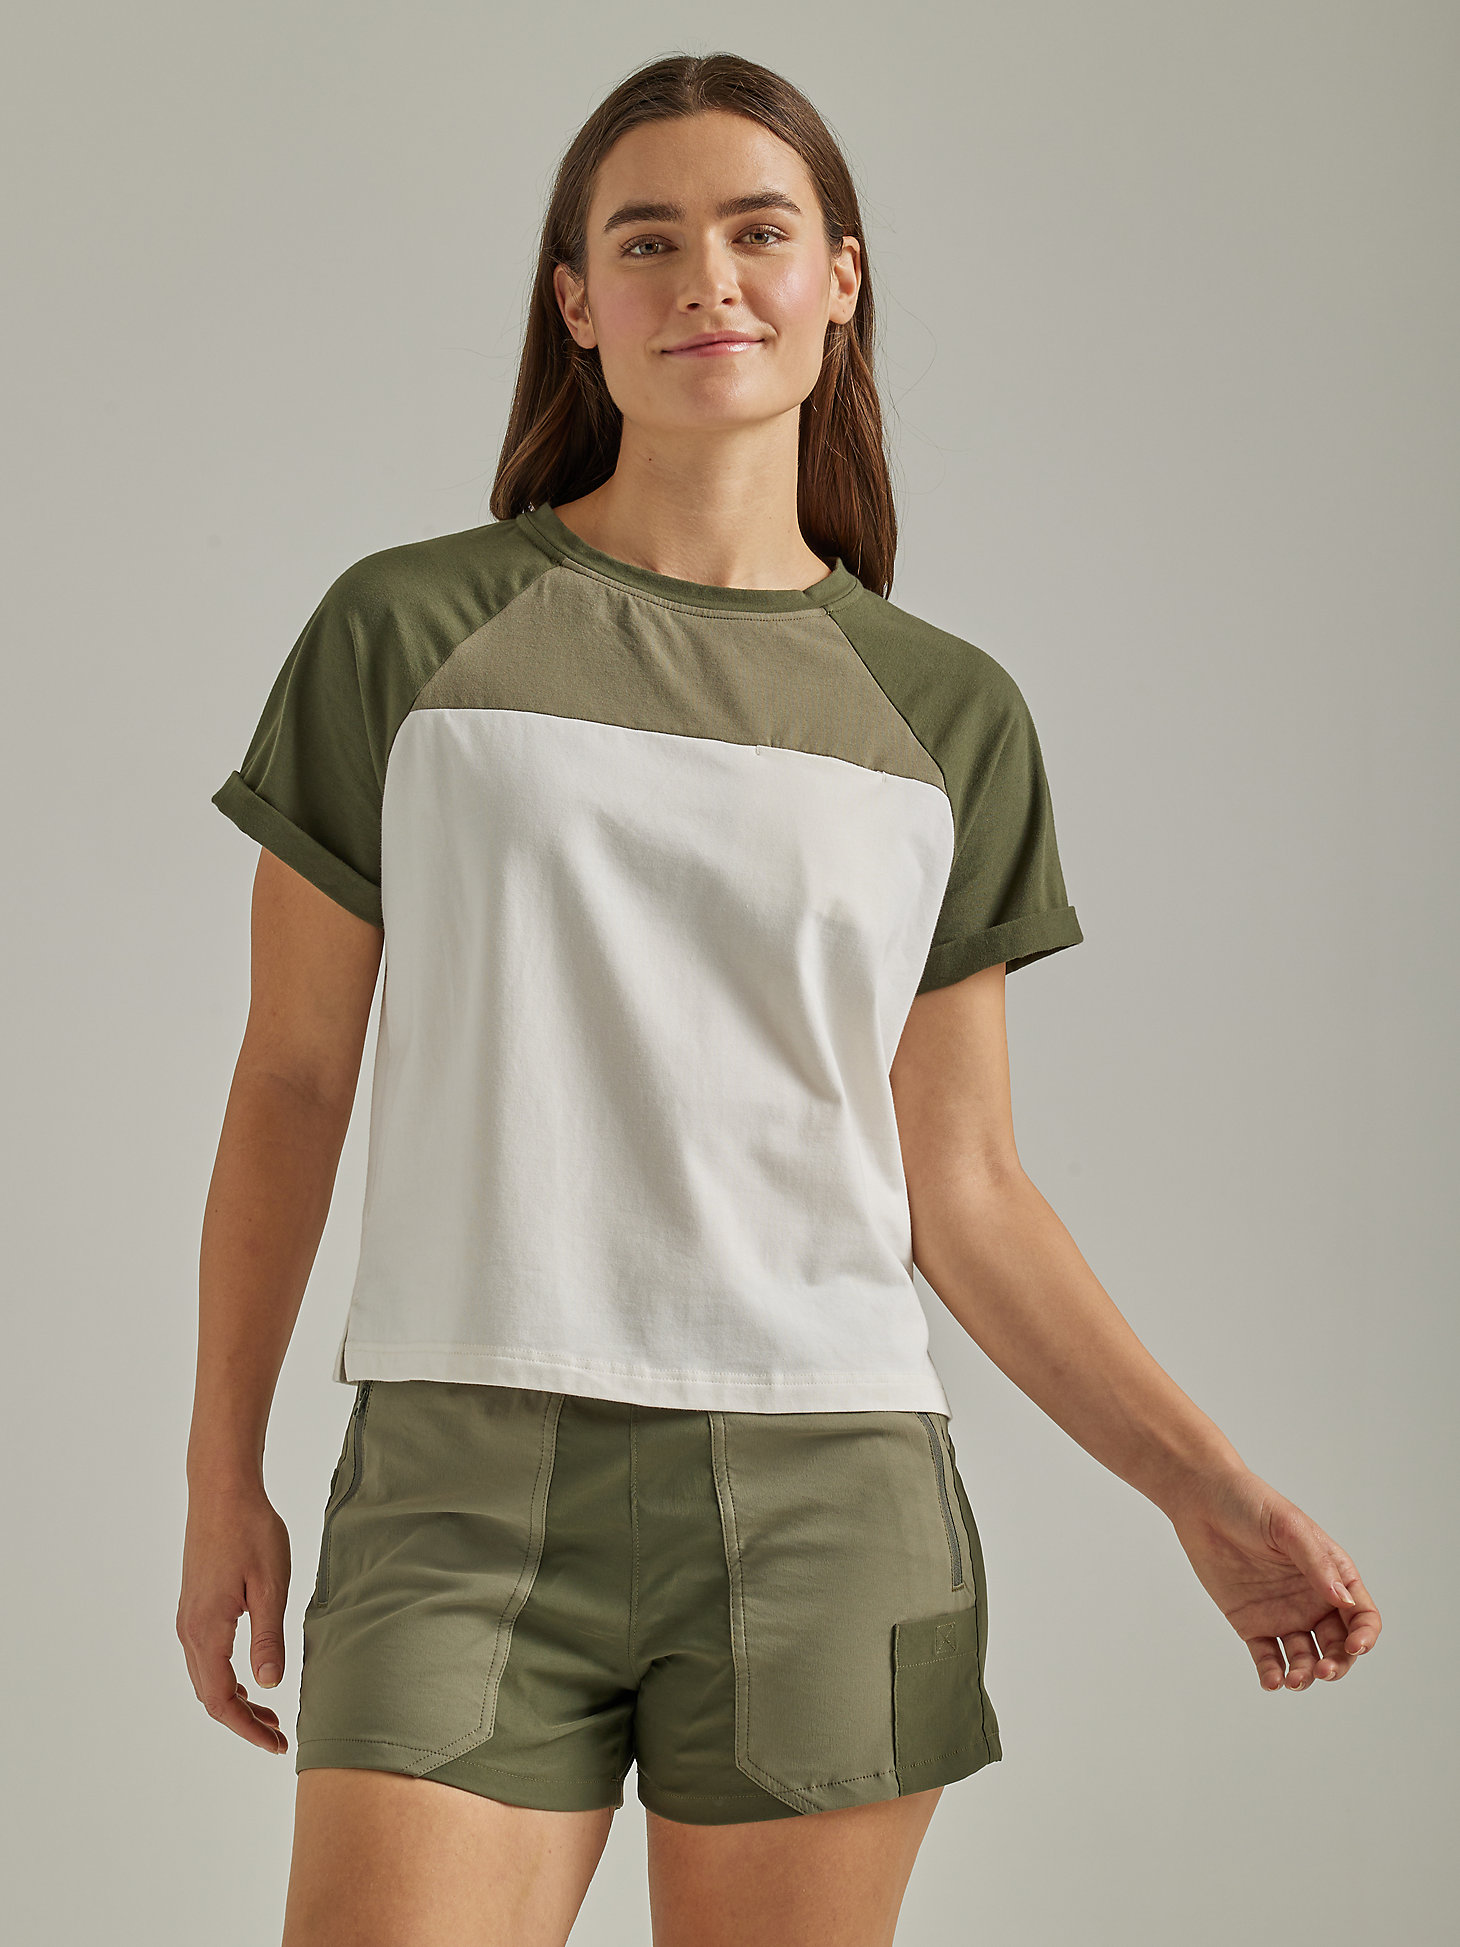 ATG By Wrangler® Women's Compass Tee in Dusty Olive main view